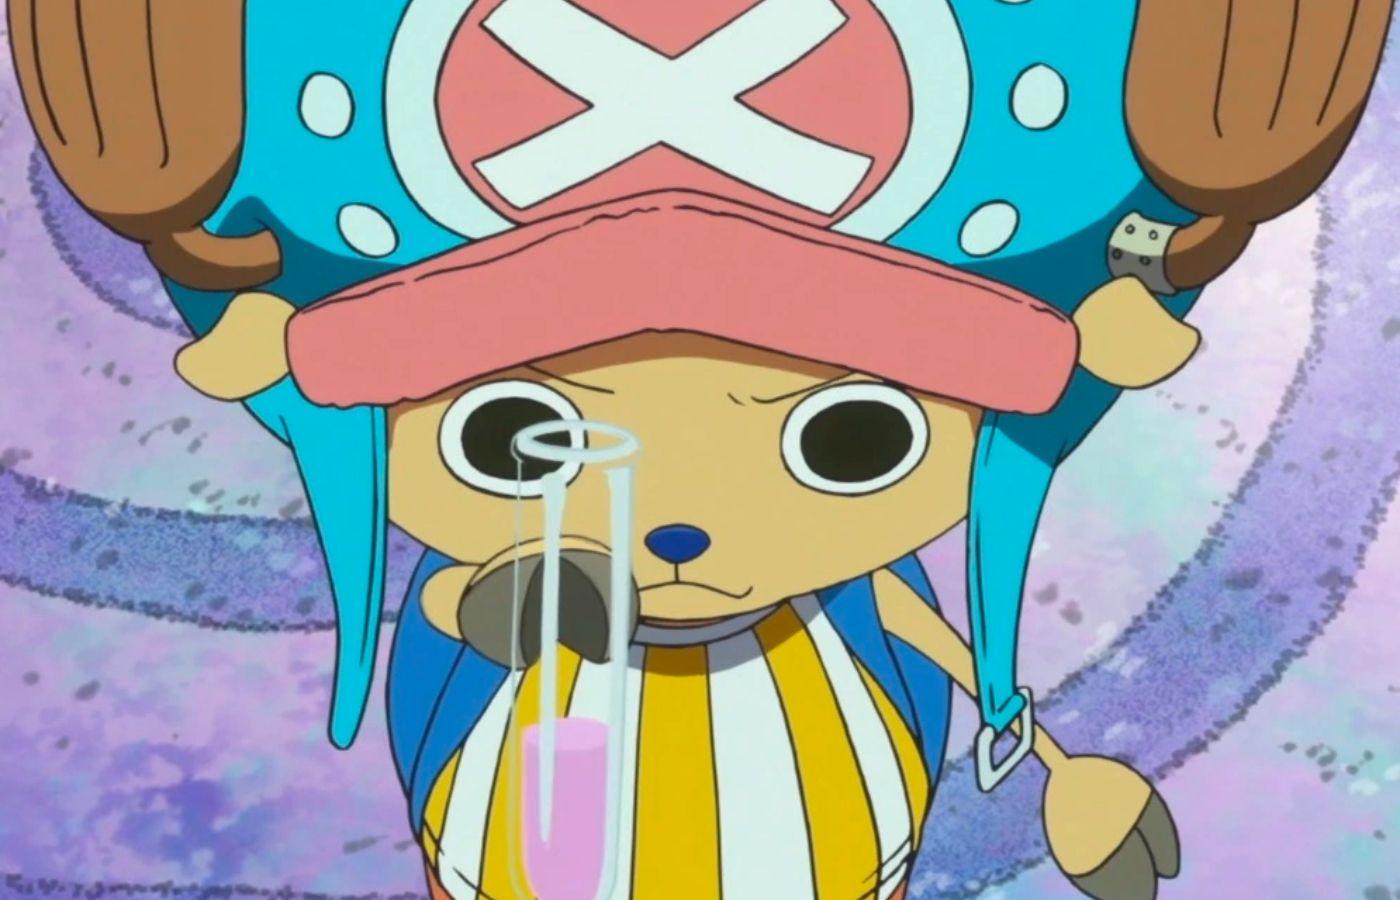 Who is Chopper in One Piece? Potential Season 2 character